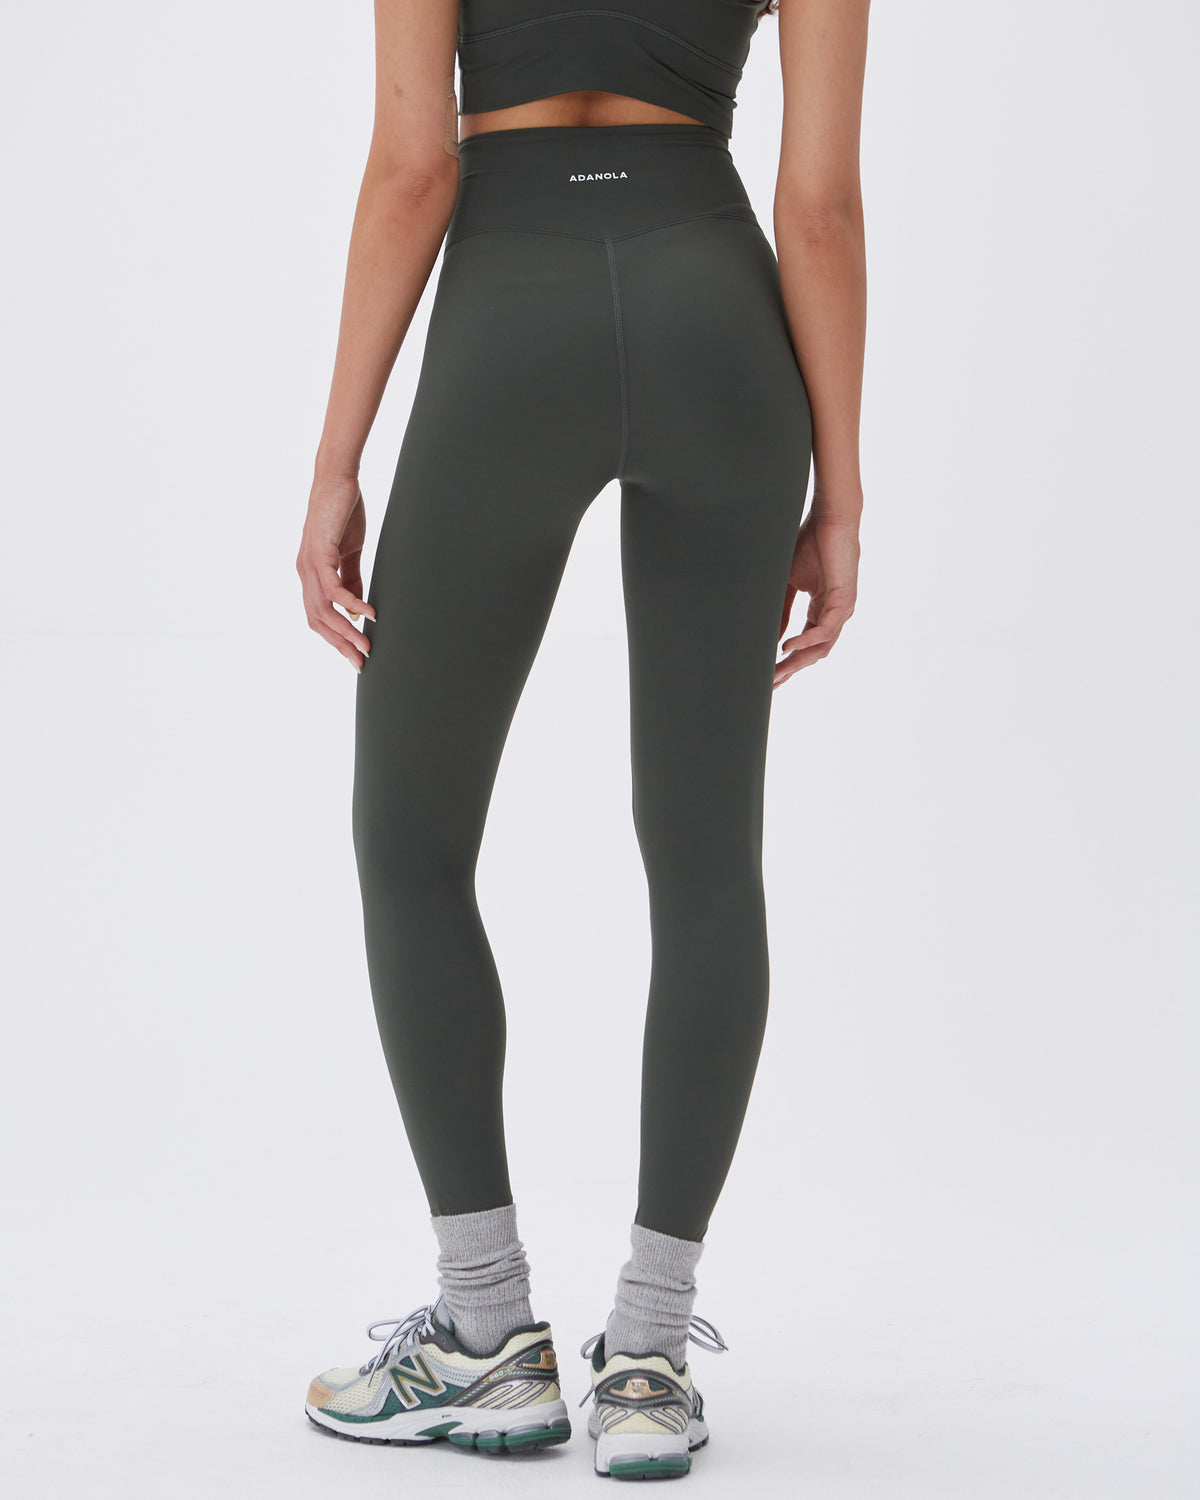 Shop Prisma's Ice Green Ankle Leggings for Ultimate Style